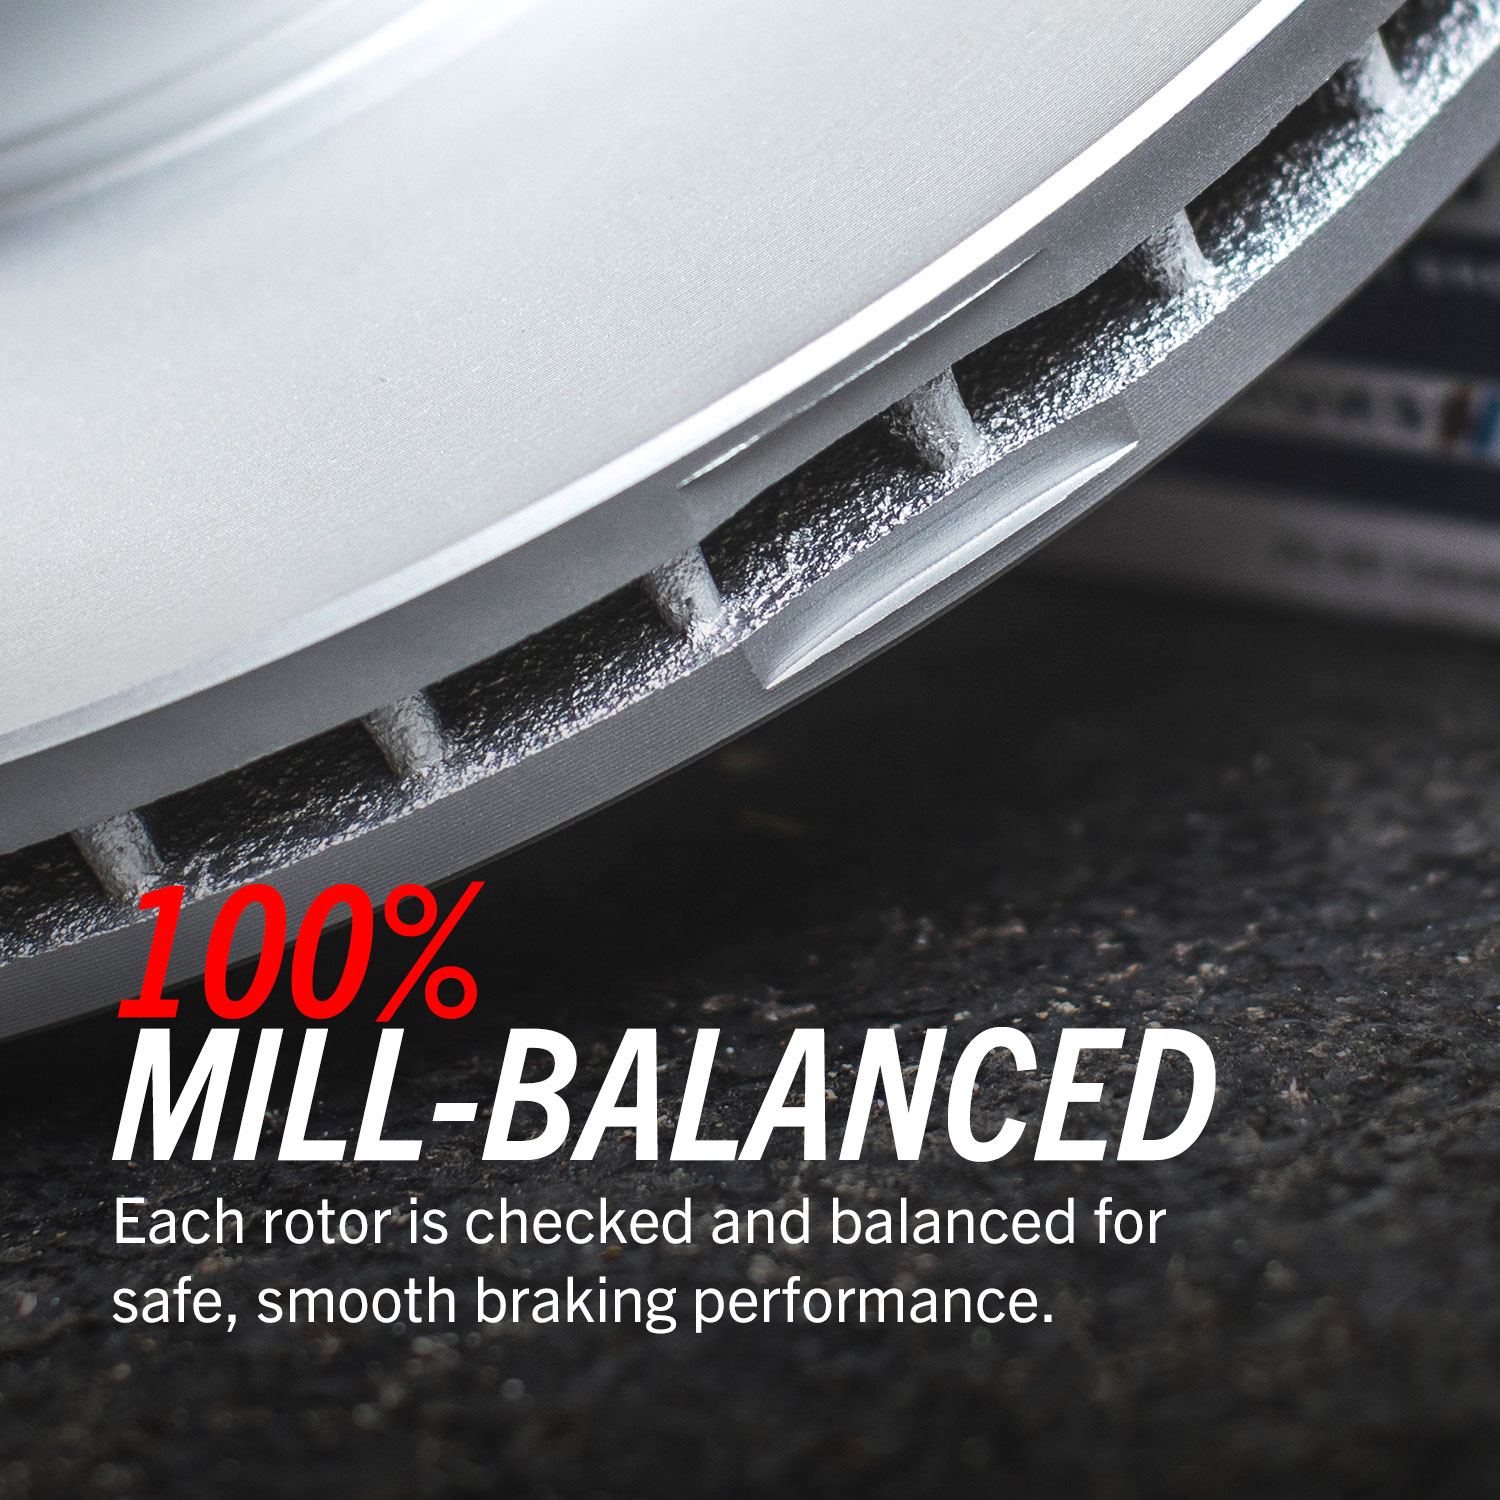 PowerStop Evolution Coated Rotor are 100% Mill-Balanced